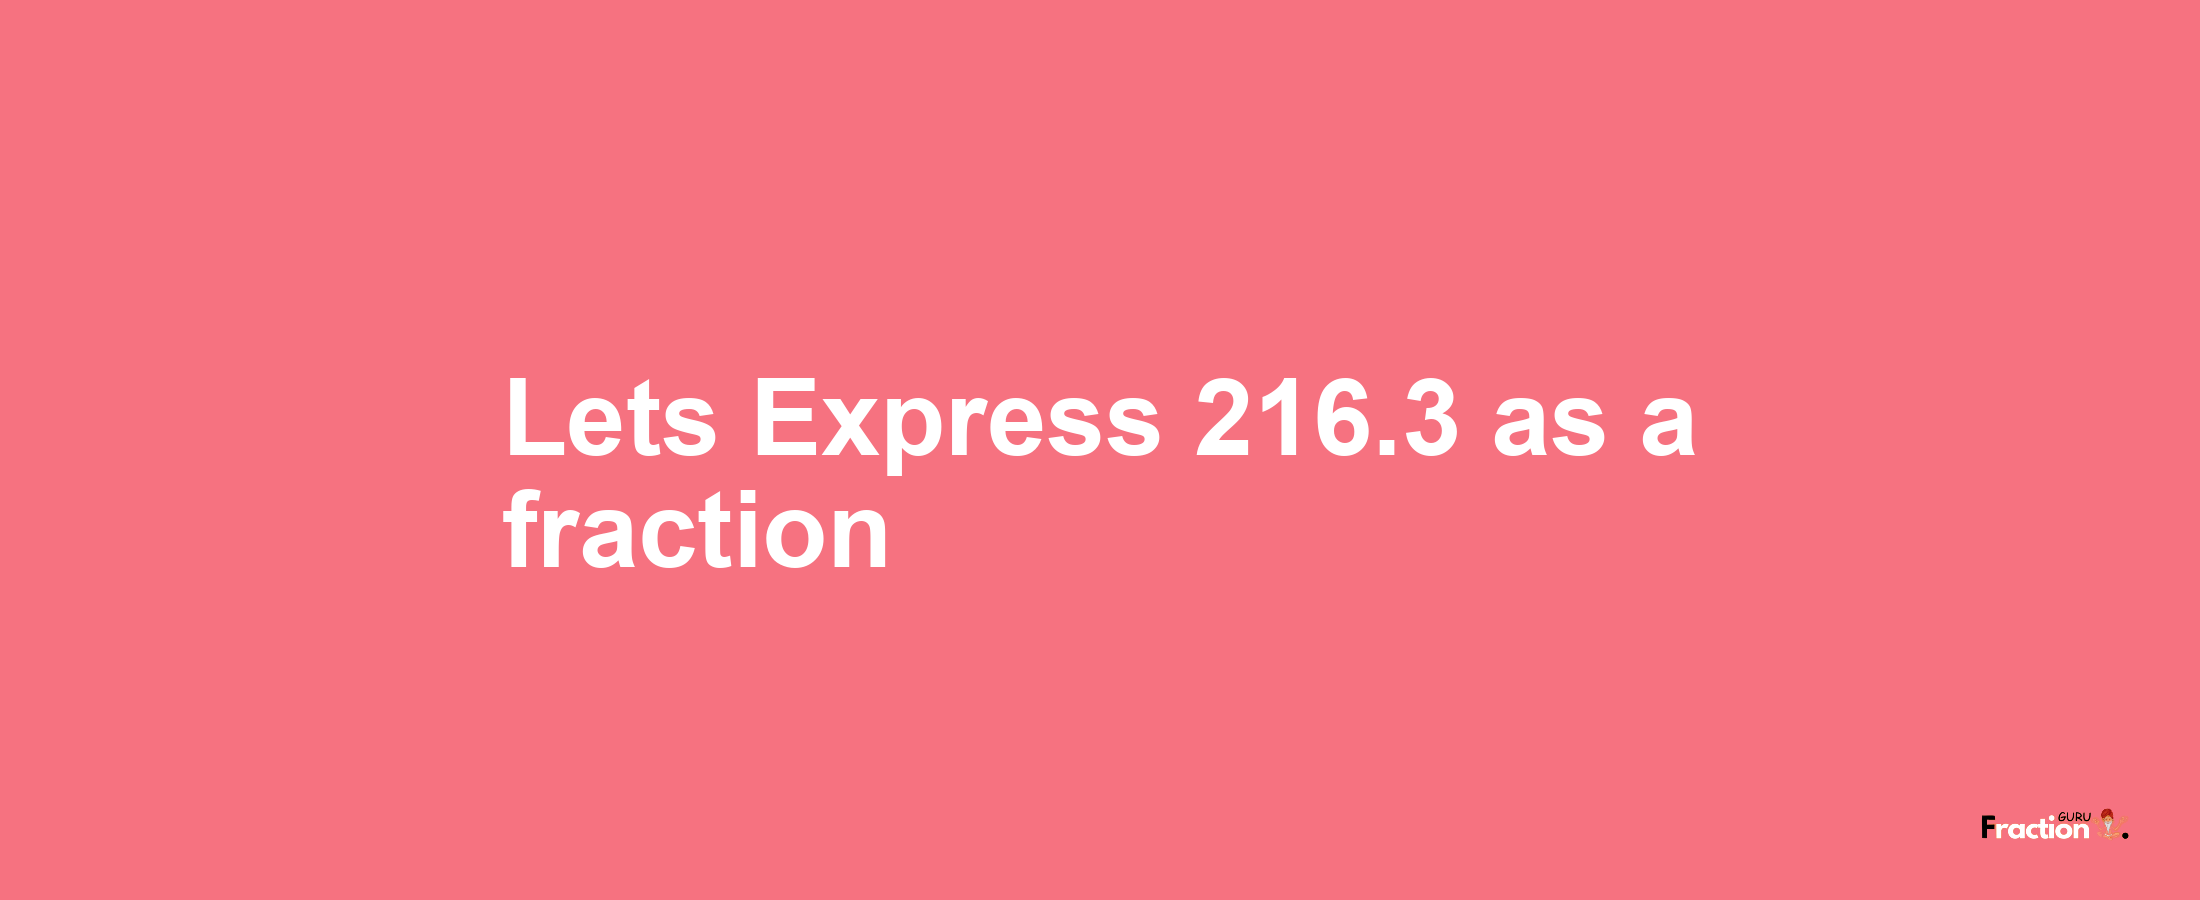 Lets Express 216.3 as afraction